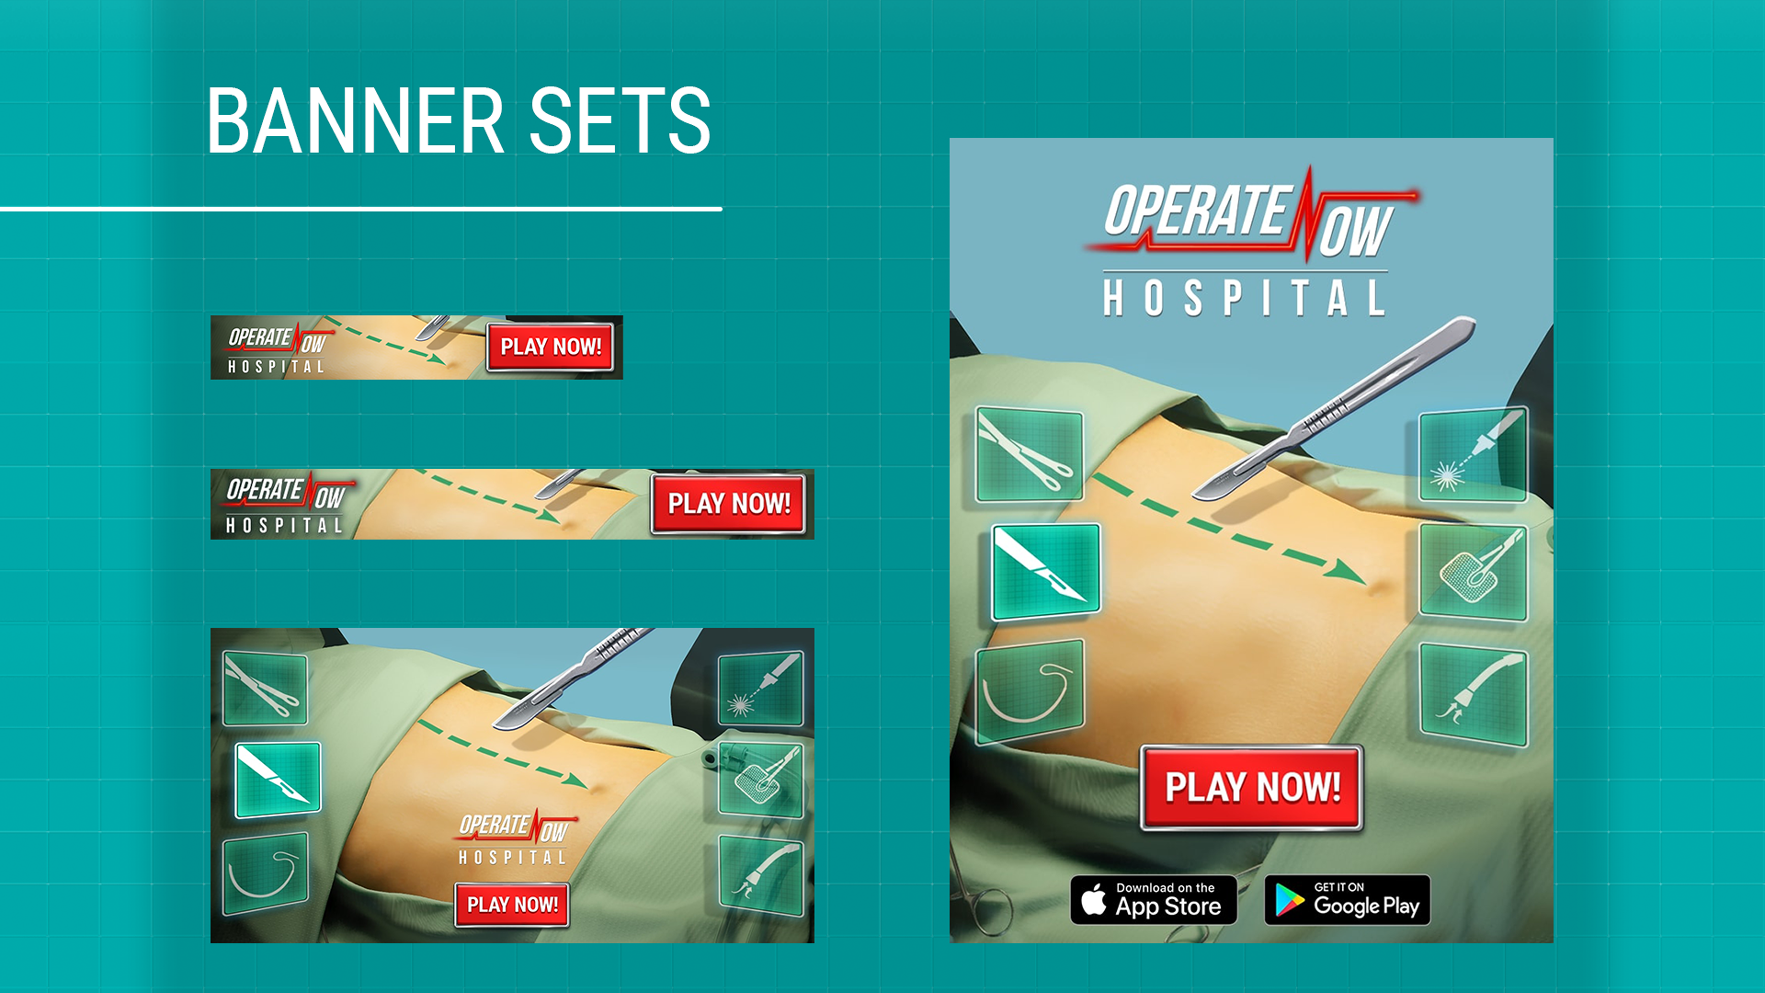 Operate Now: Hospital na App Store